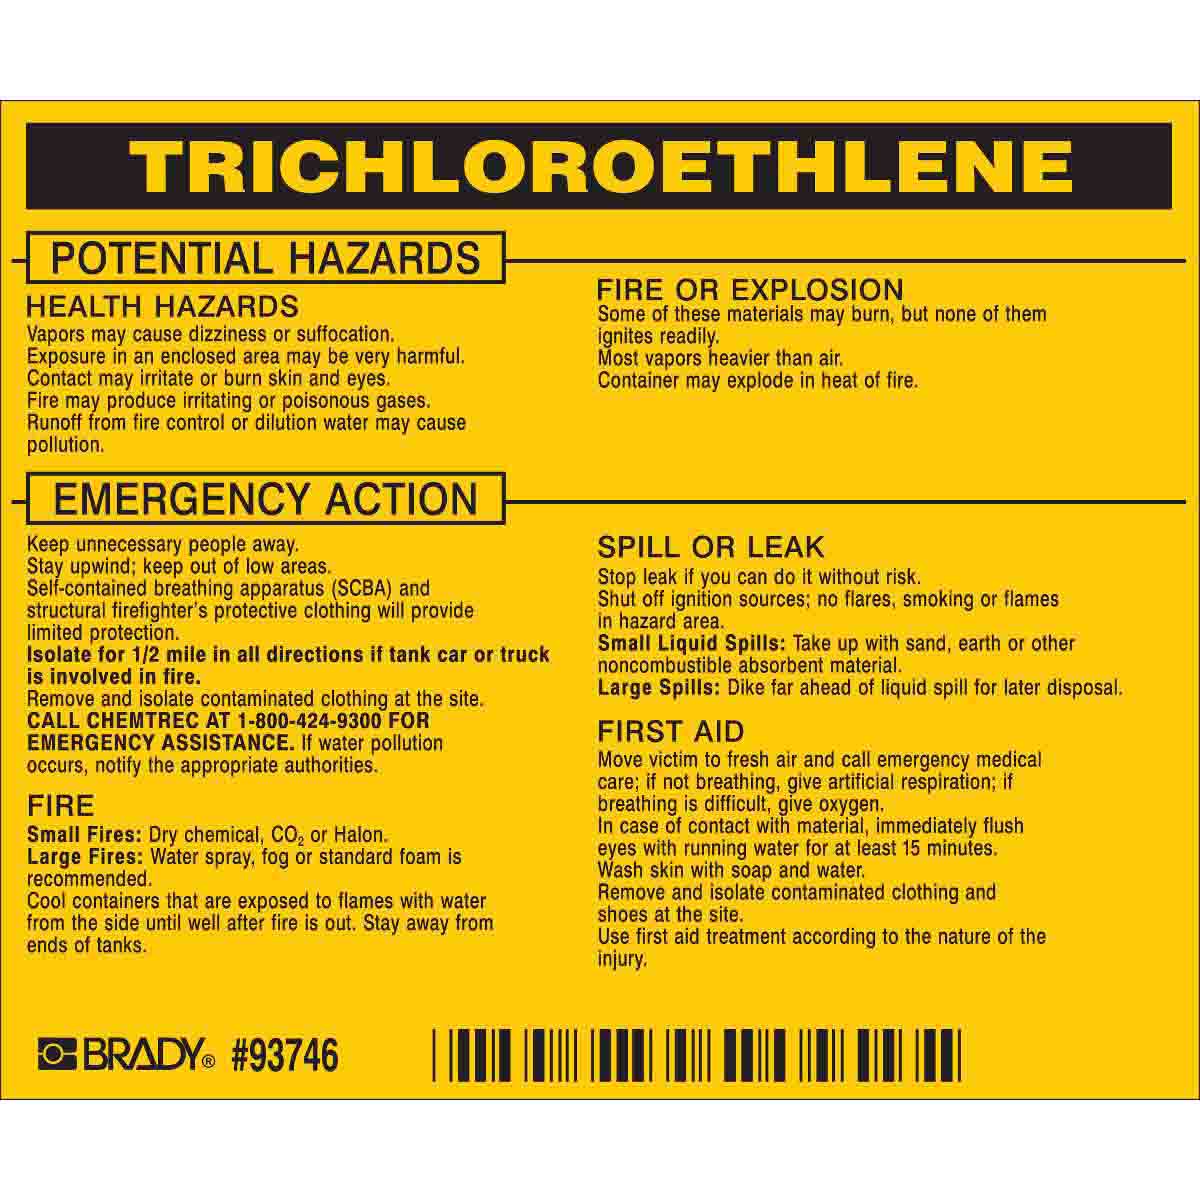 3 3/4 Height x 4 1/2 Width 3 3/4 Height x 4 1/2 Width Legend Acrylonitrile Inhibited 25 Labels per Package 25 Labels per Package Legend Acrylonitrile Brady 93482 Vinyl Hazardous Material Label Inhibited Black On Yellow 